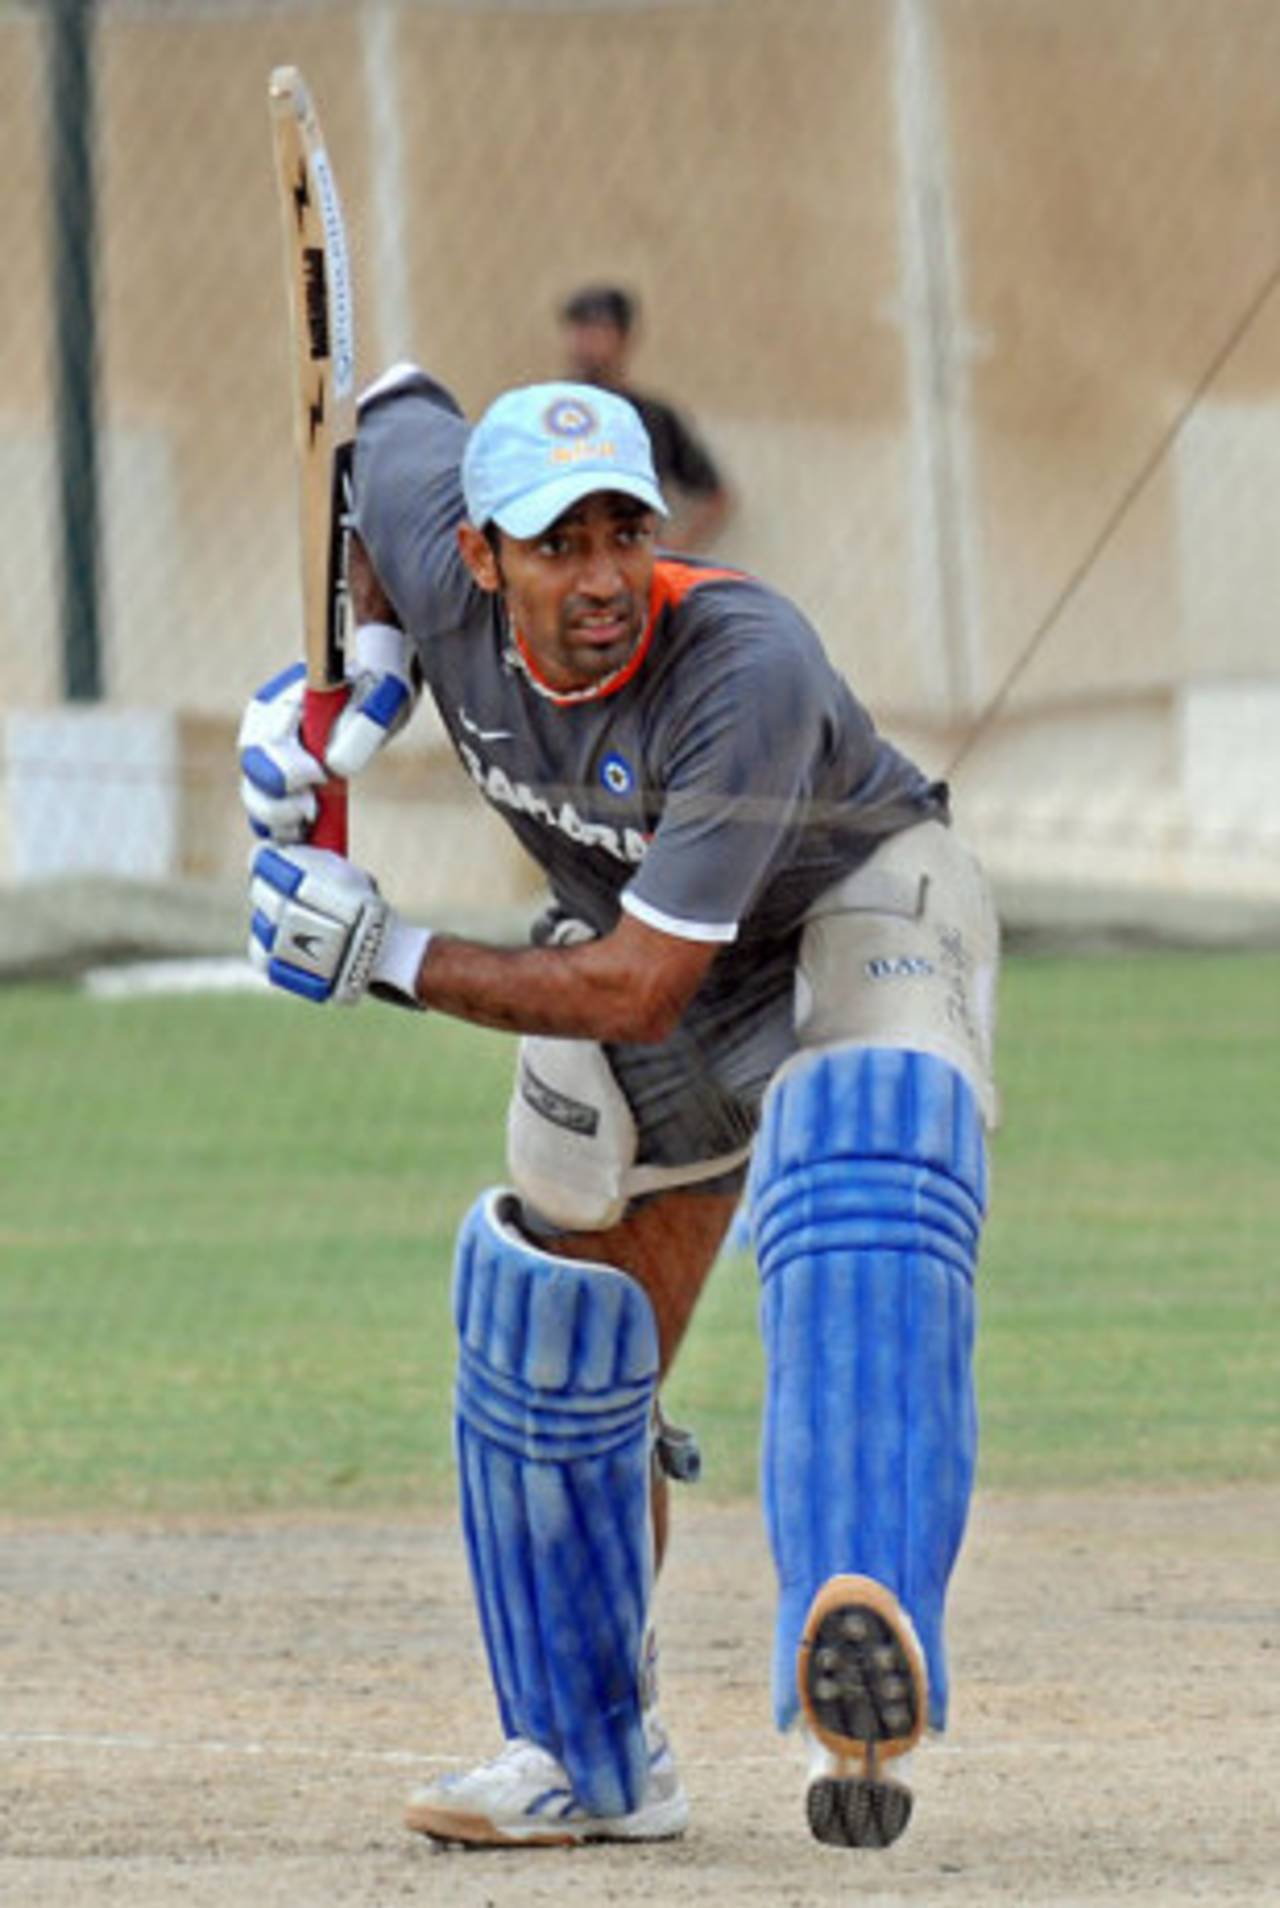 Robin Uthappa, who earned the highest bid, was bought by Bangalore Brigaders for Rs. 325,000&nbsp;&nbsp;&bull;&nbsp;&nbsp;AFP